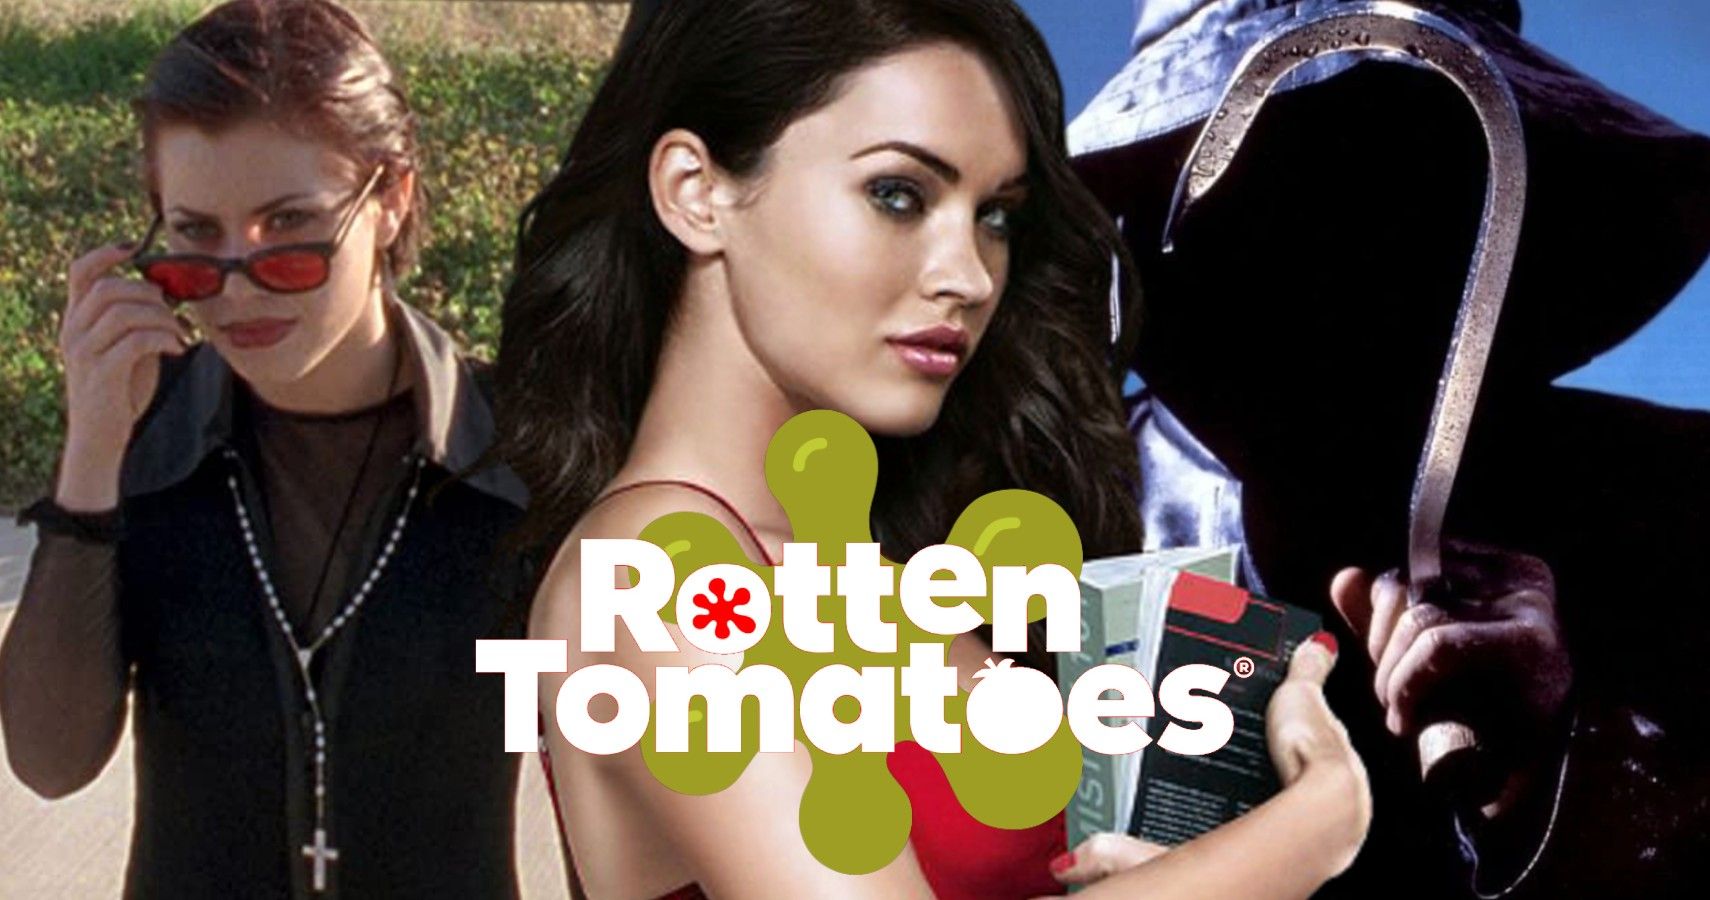 Jennifers Body & 9 Teen Horror Movies With Low Rotten Tomatoes Scores (That Fans Love)